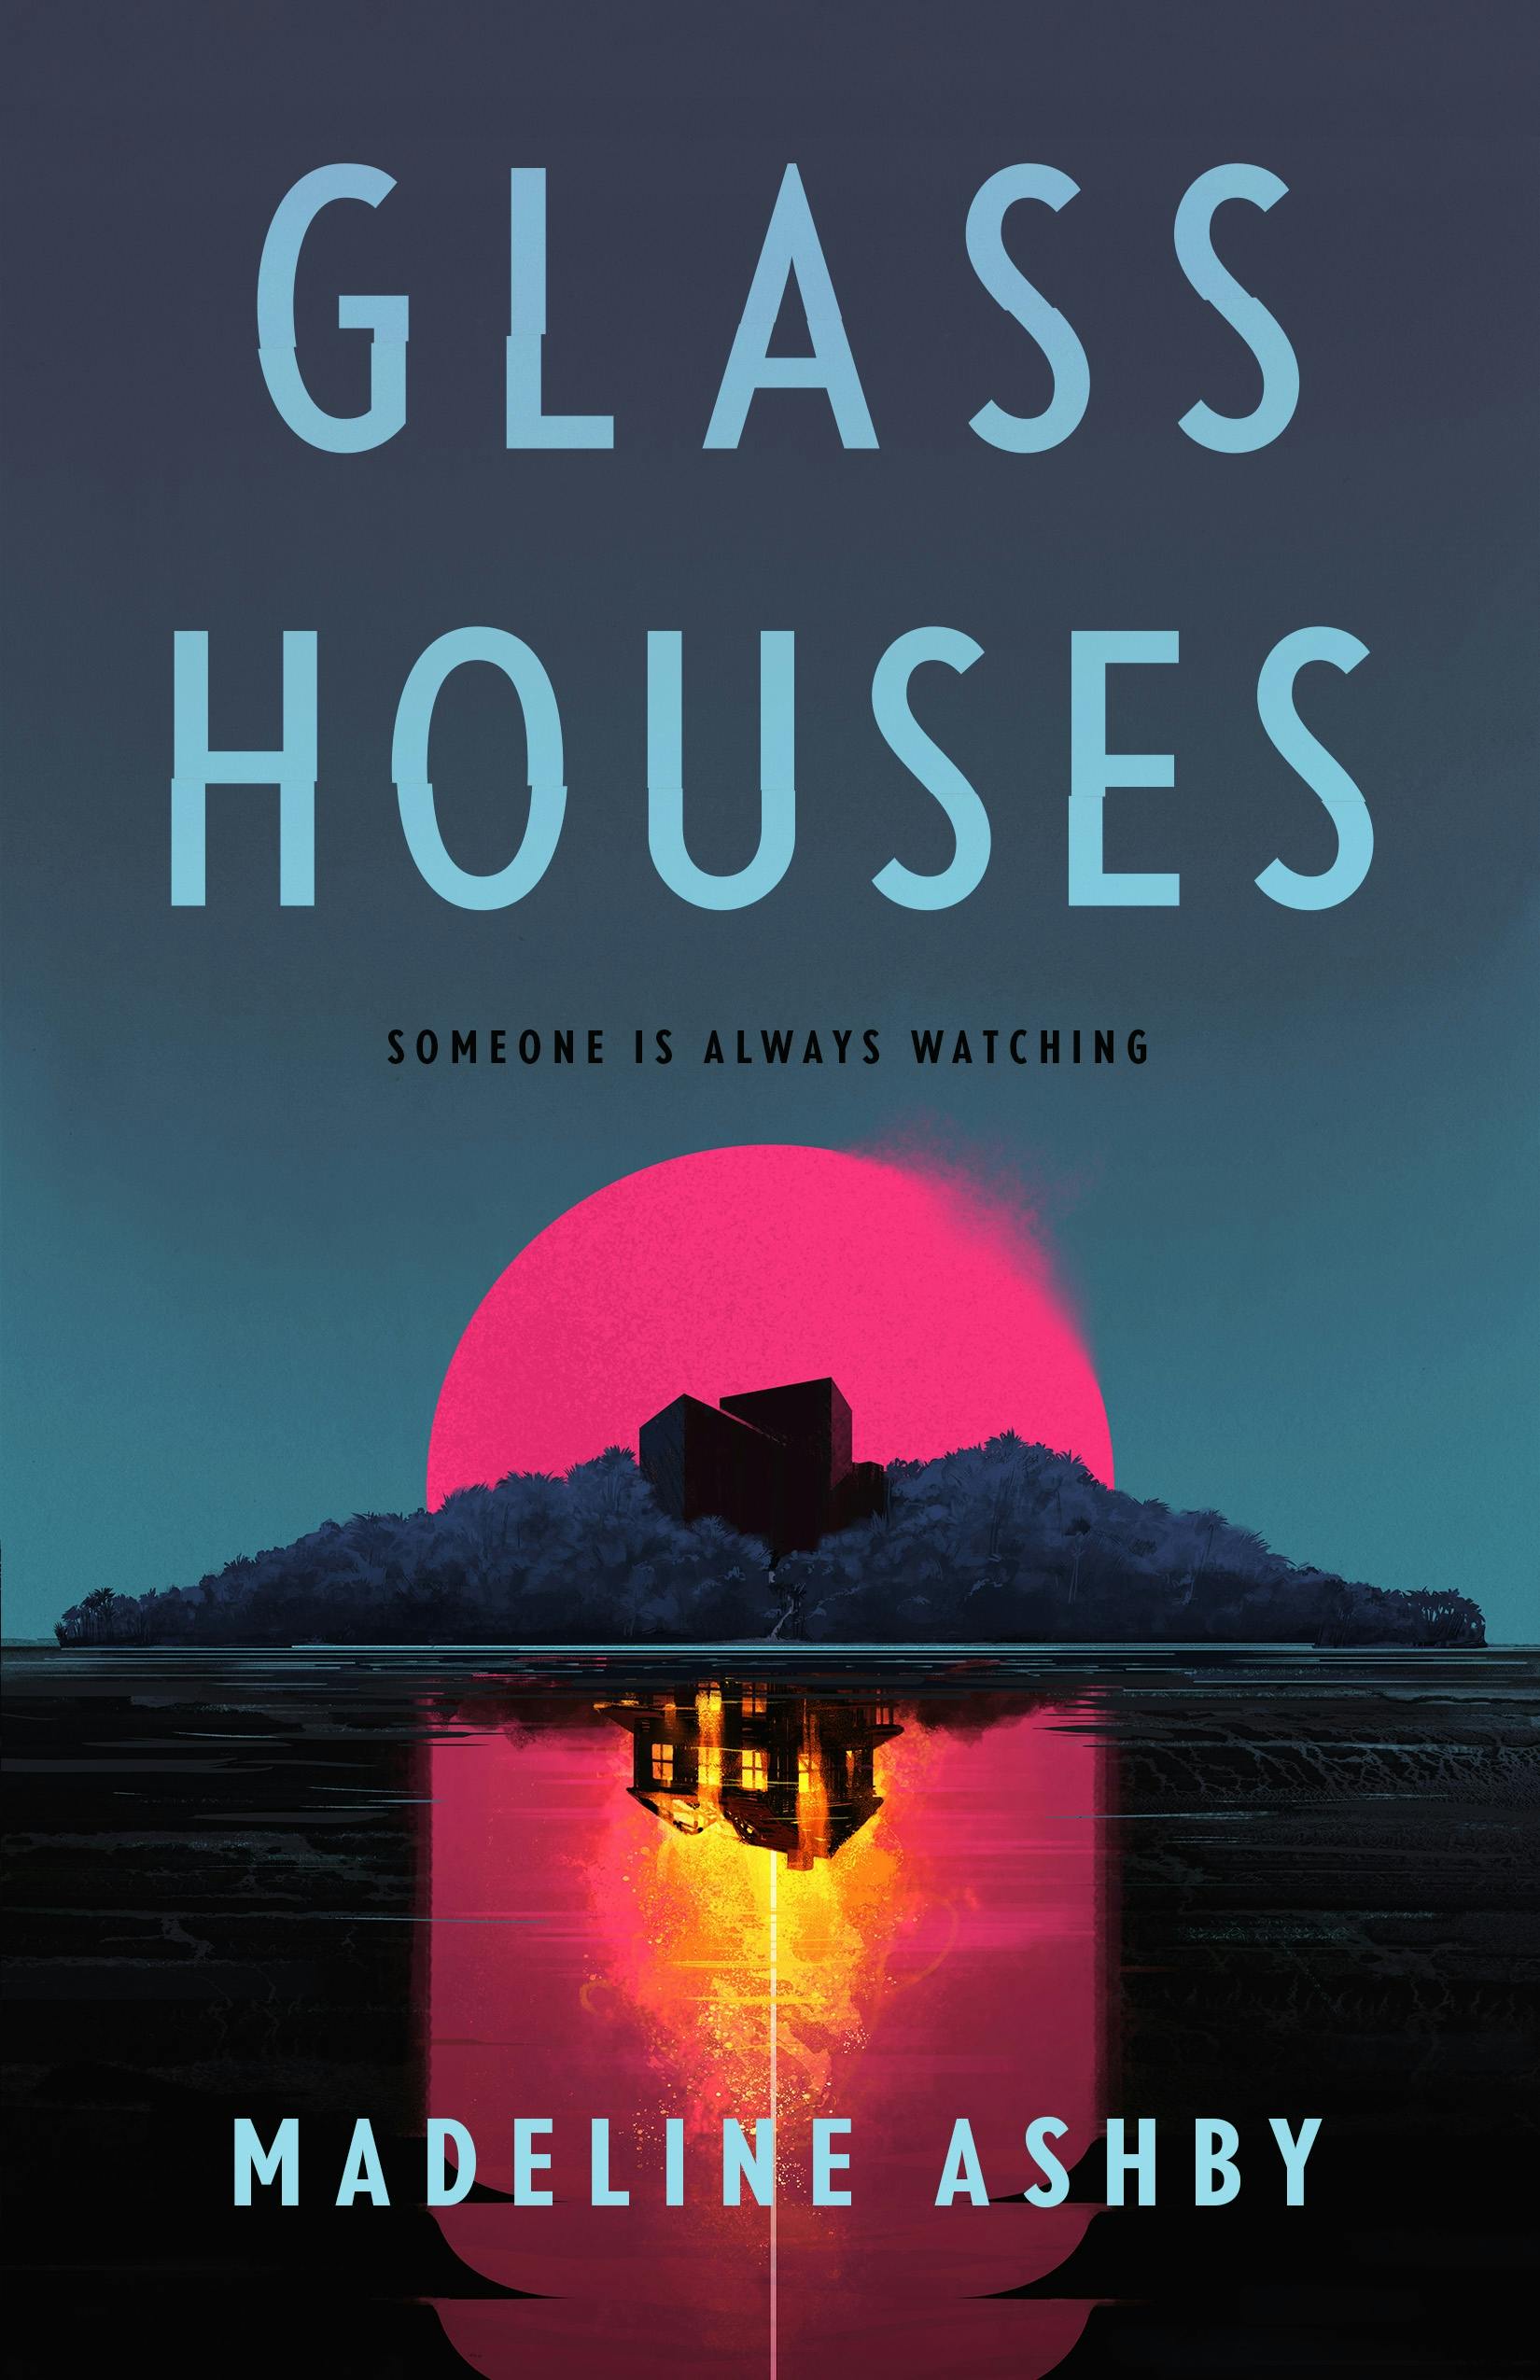 Cover for the book titled as: Glass Houses